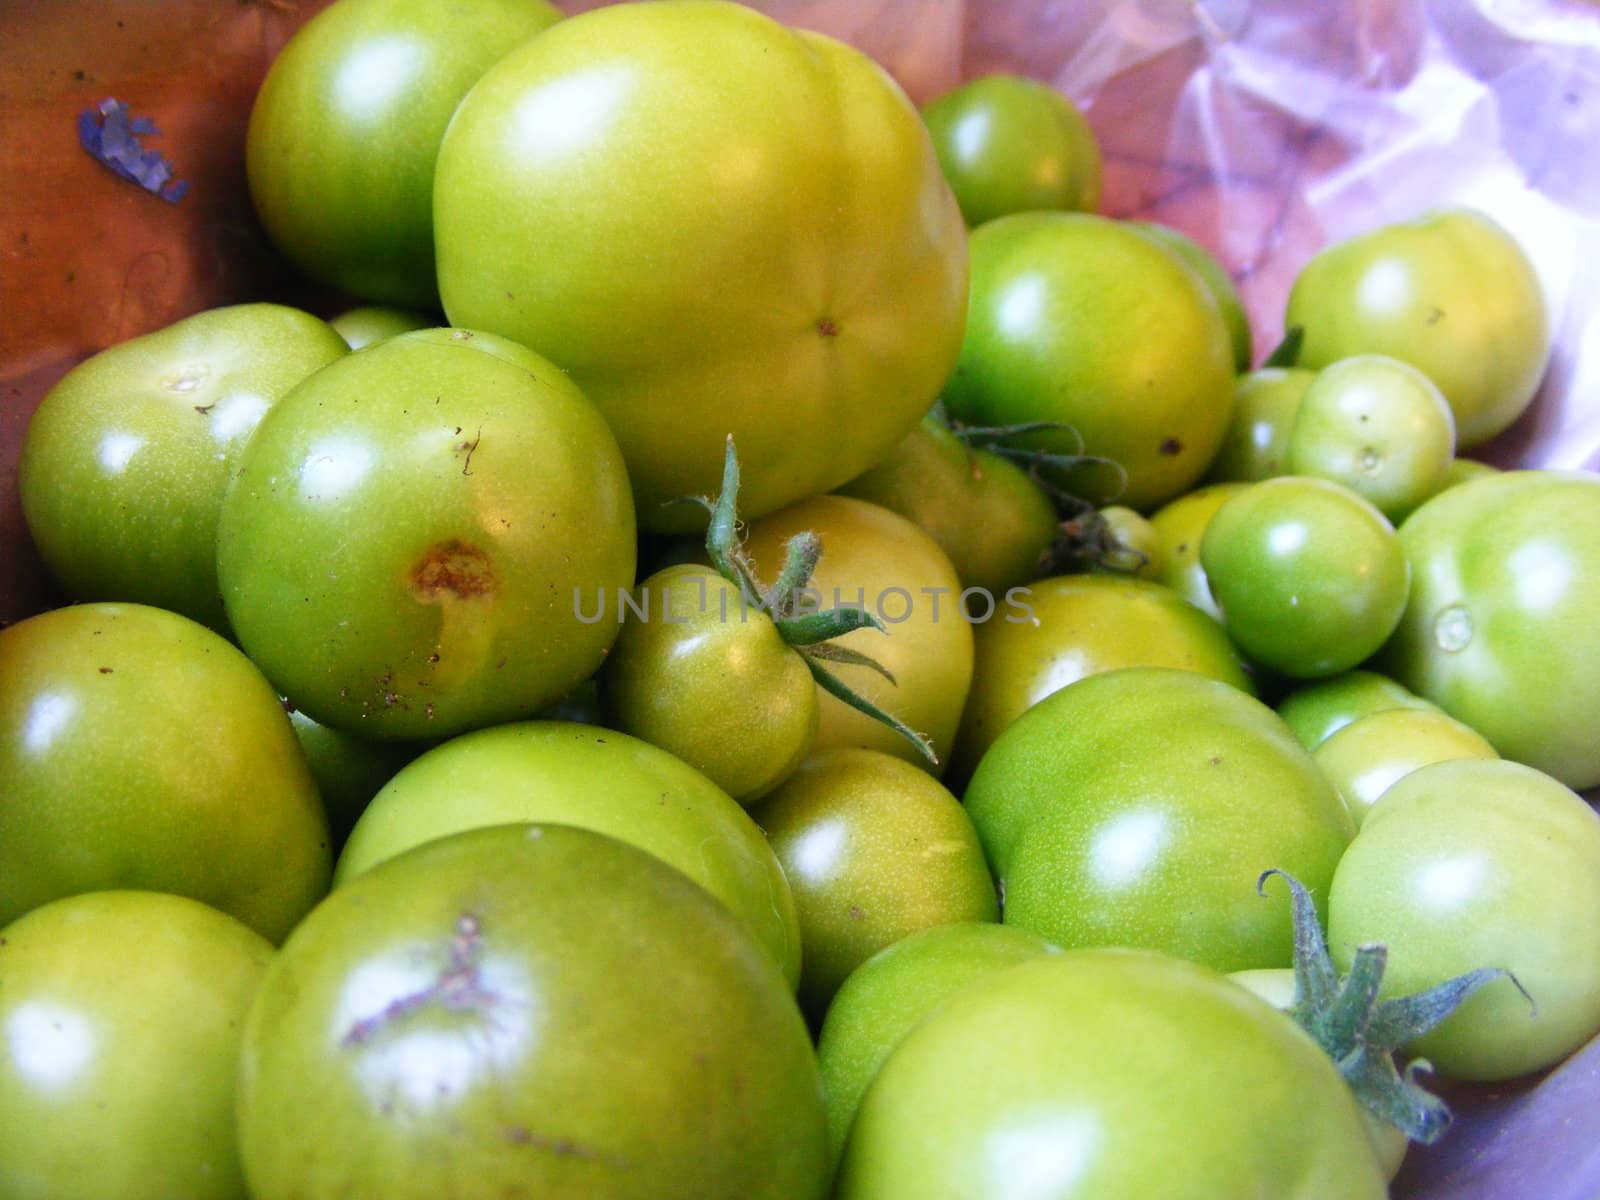 A photograph of not quite ripe green tomatoes.